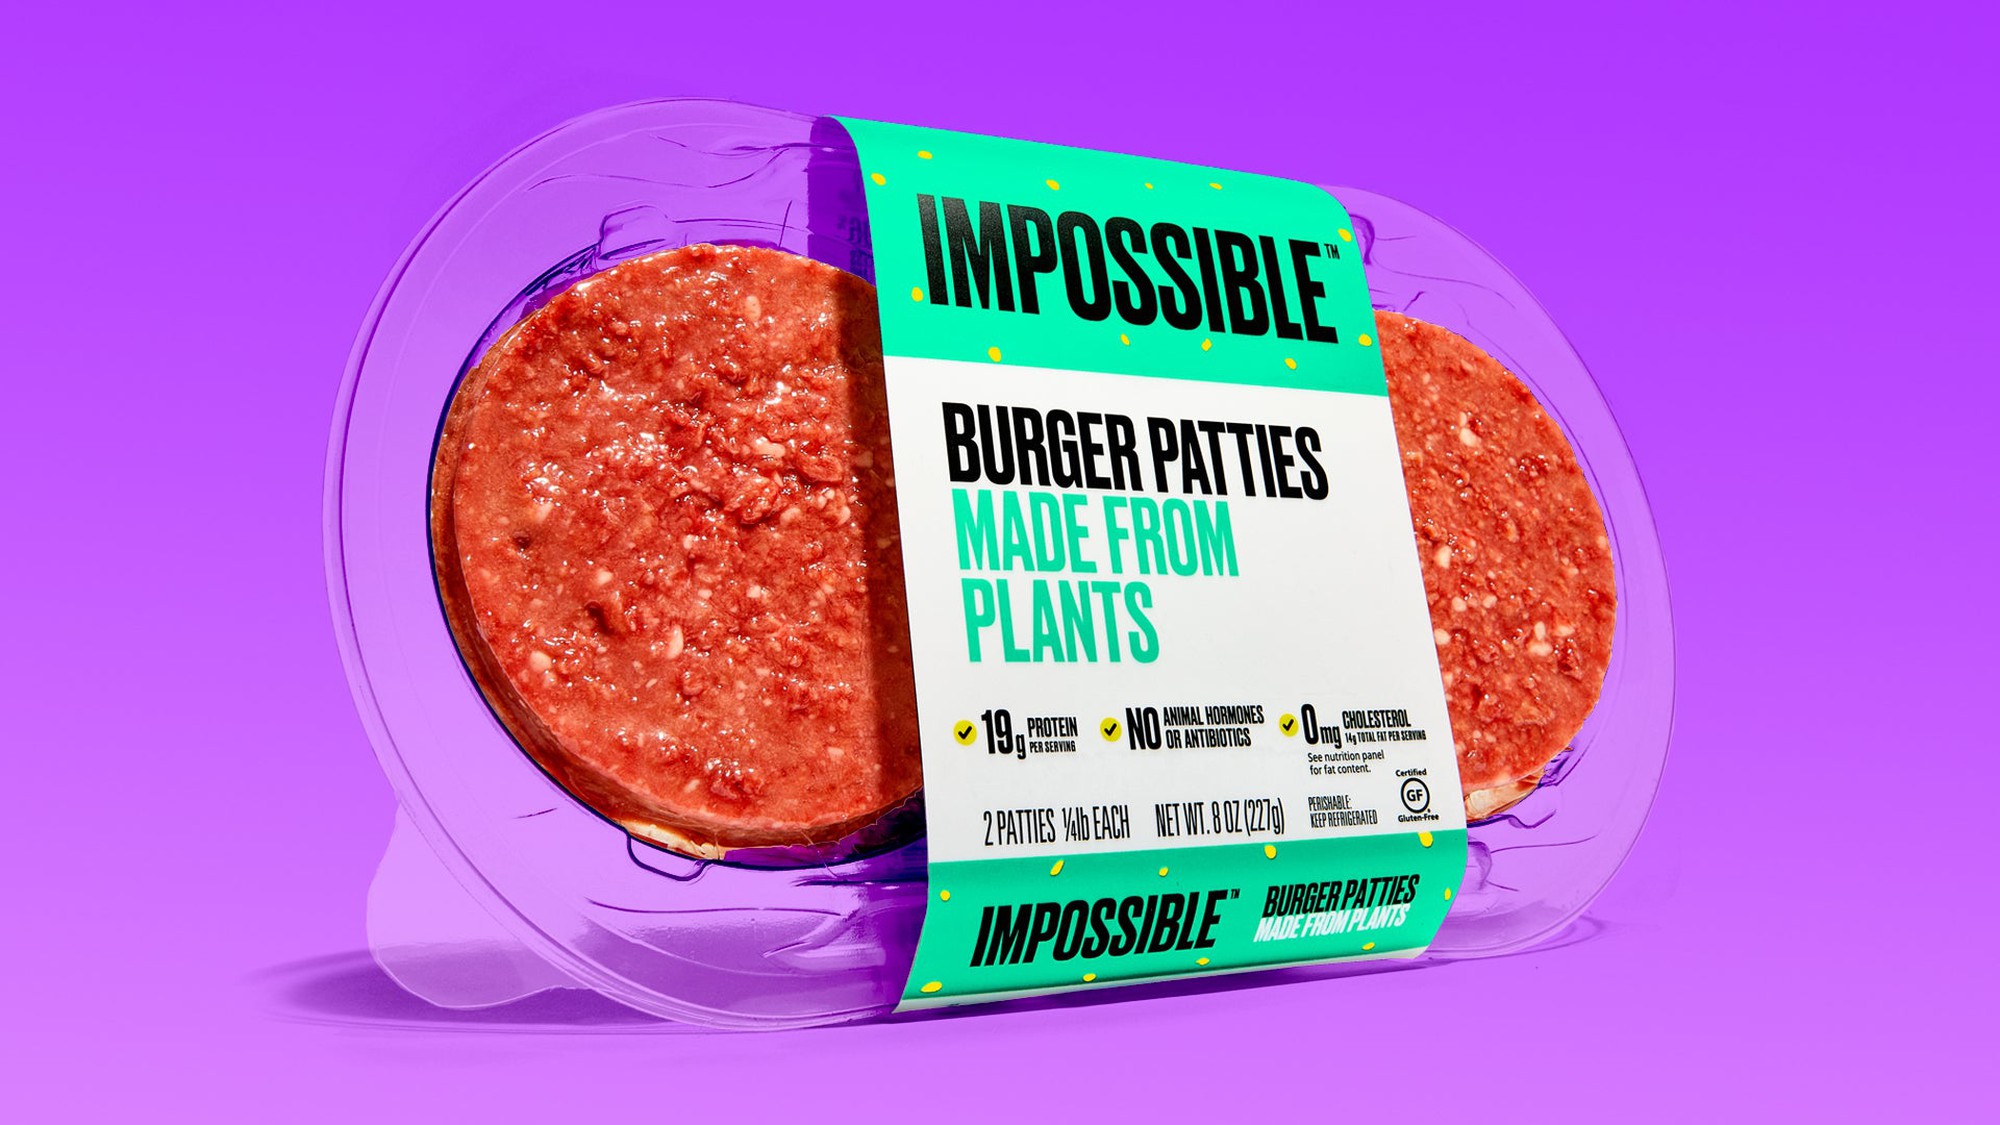 Impossible foods notizie ipo forex cryptocurrencies